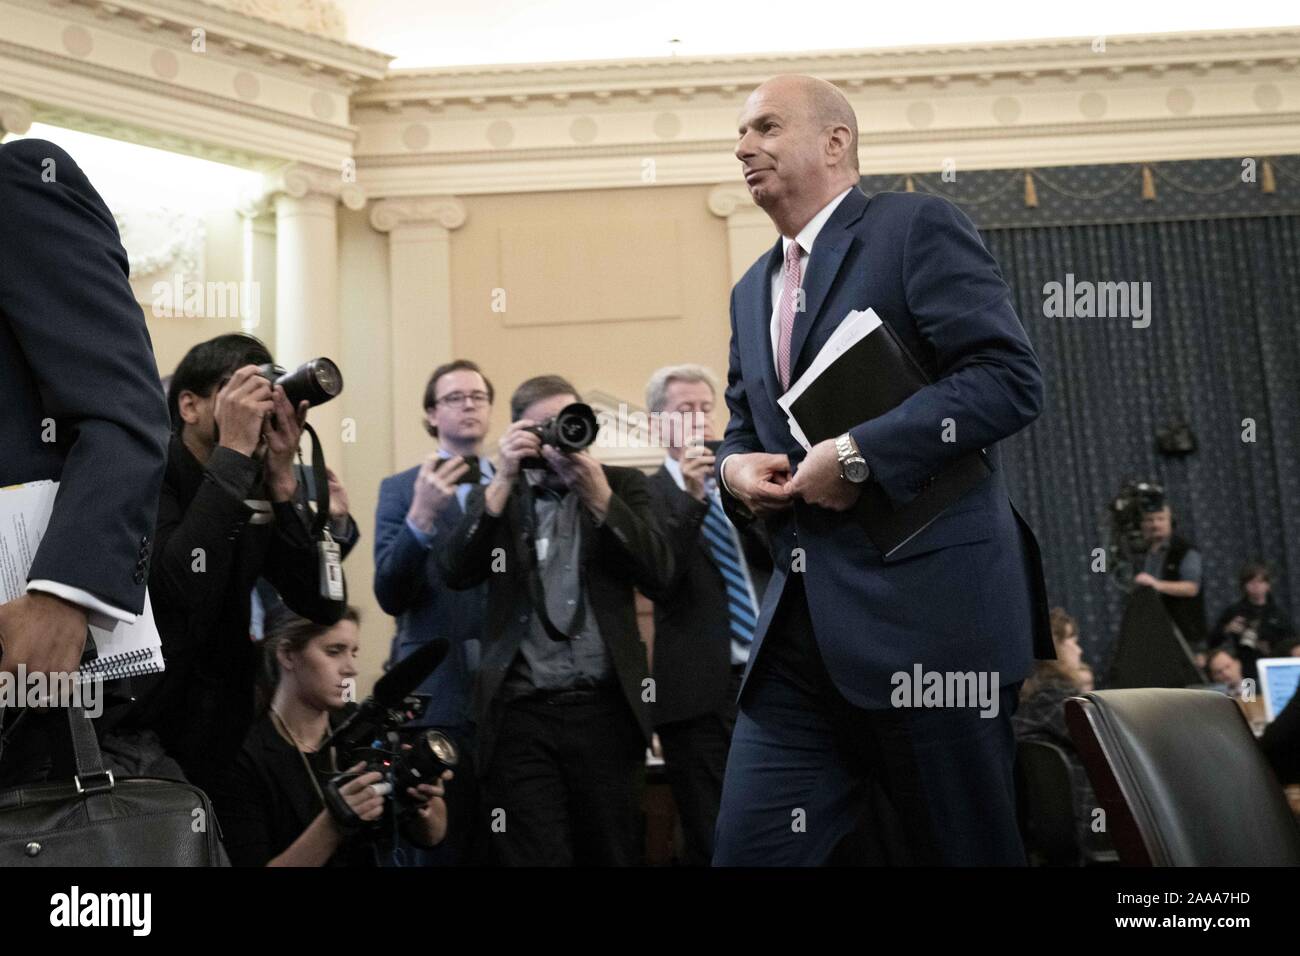 Washington, District of Columbia, USA. 20th Nov, 2019. United States' Ambassador to the European Union GORDON SONDLAND leaves the hearing room after testifying before the House Intelligence Committee on the third day of open testimony regarding the impeachment inquiry into President Donald Trump's efforts to withhold military aid from Ukraine until they provided damaging statements against his political rival, Joe Biden. November 20, 2019 Credit: Douglas Christian/ZUMA Wire/Alamy Live News Stock Photo